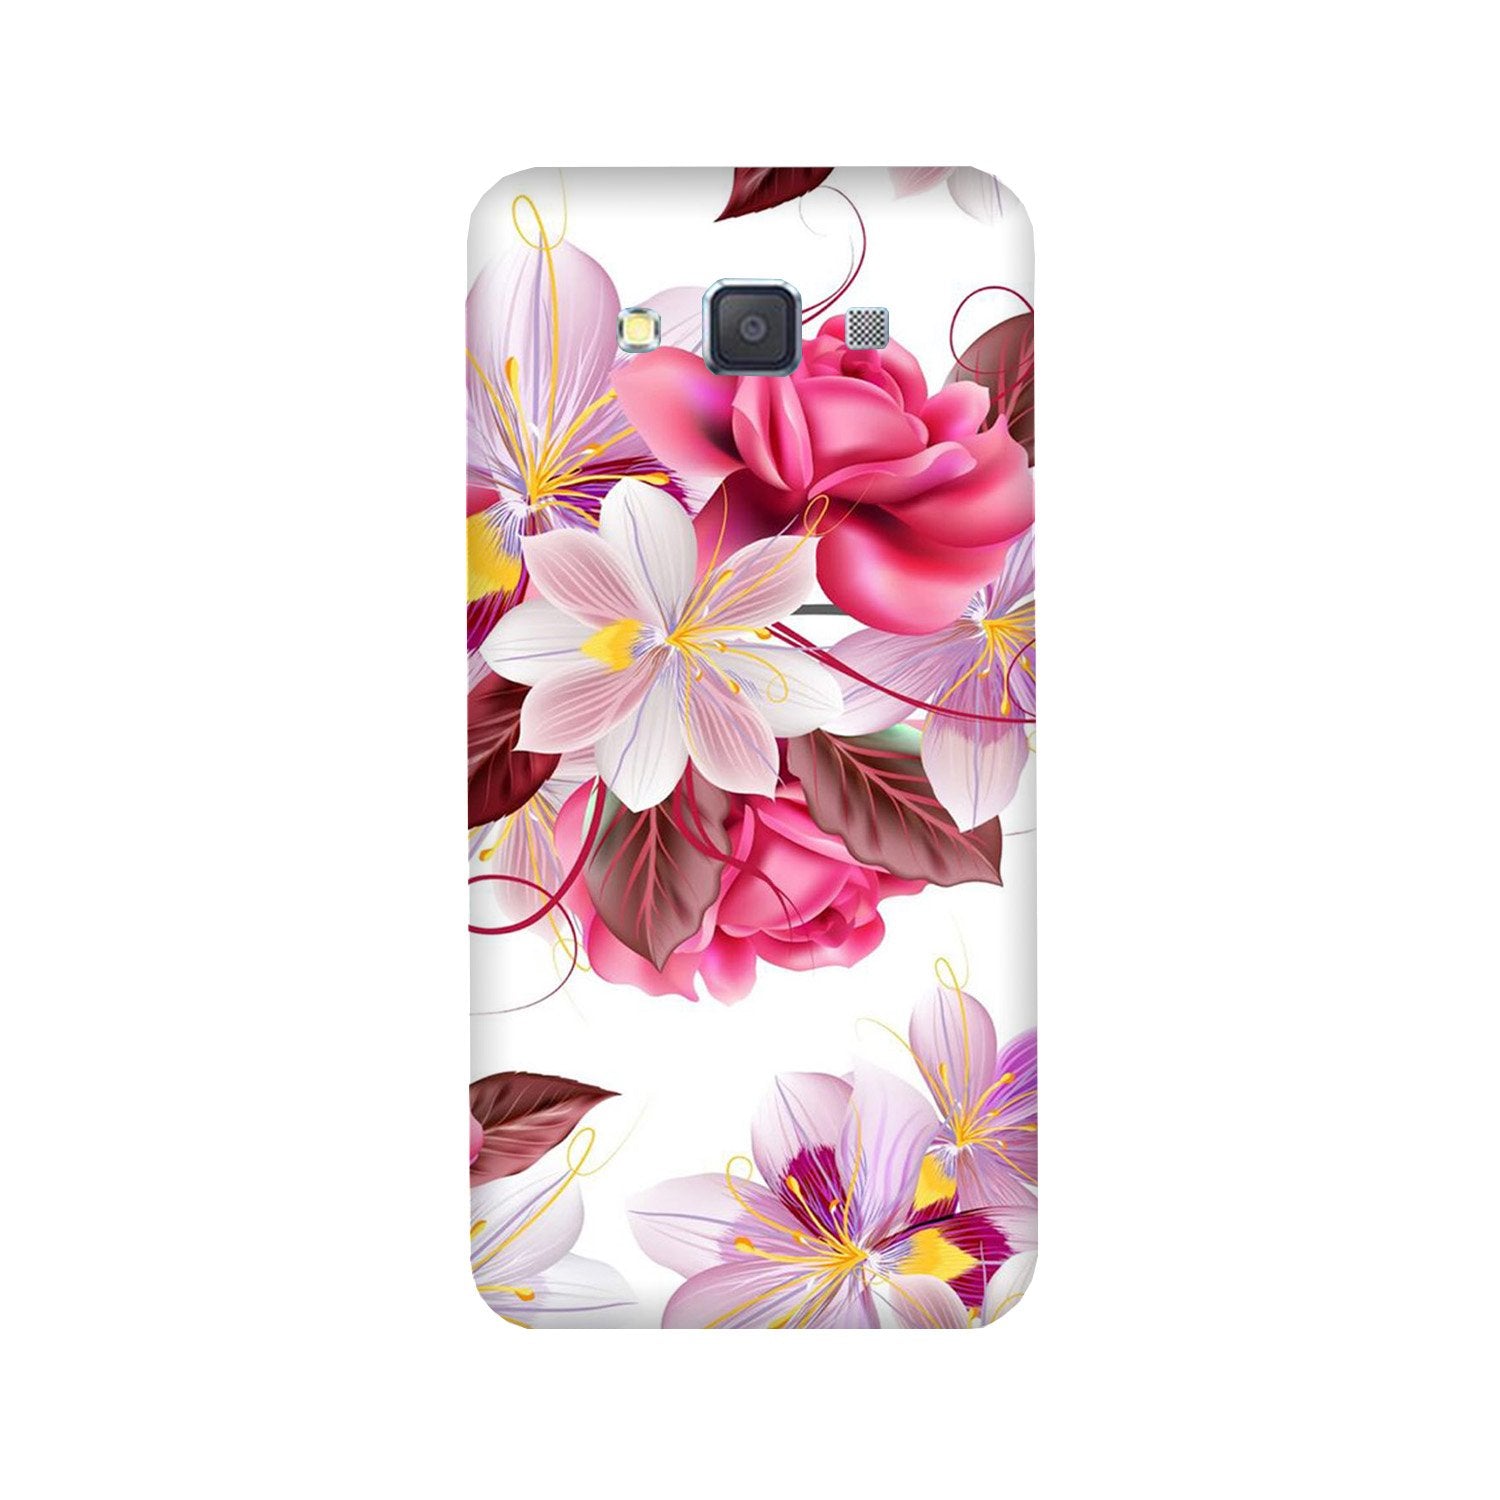 Beautiful flowers Case for Galaxy E7